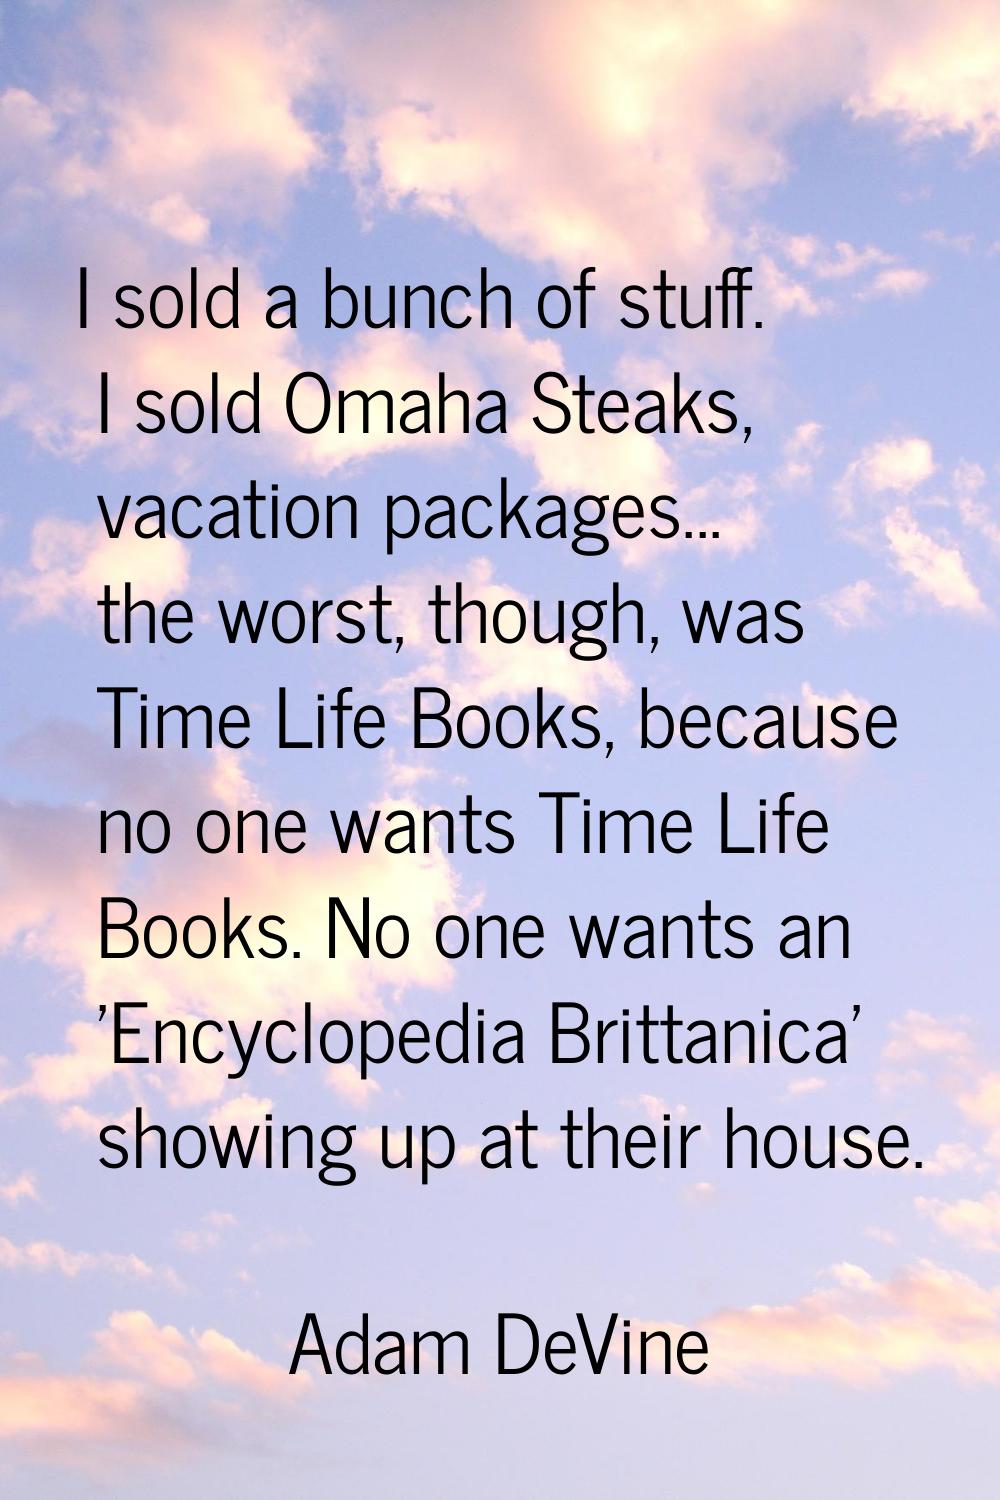 I sold a bunch of stuff. I sold Omaha Steaks, vacation packages... the worst, though, was Time Life